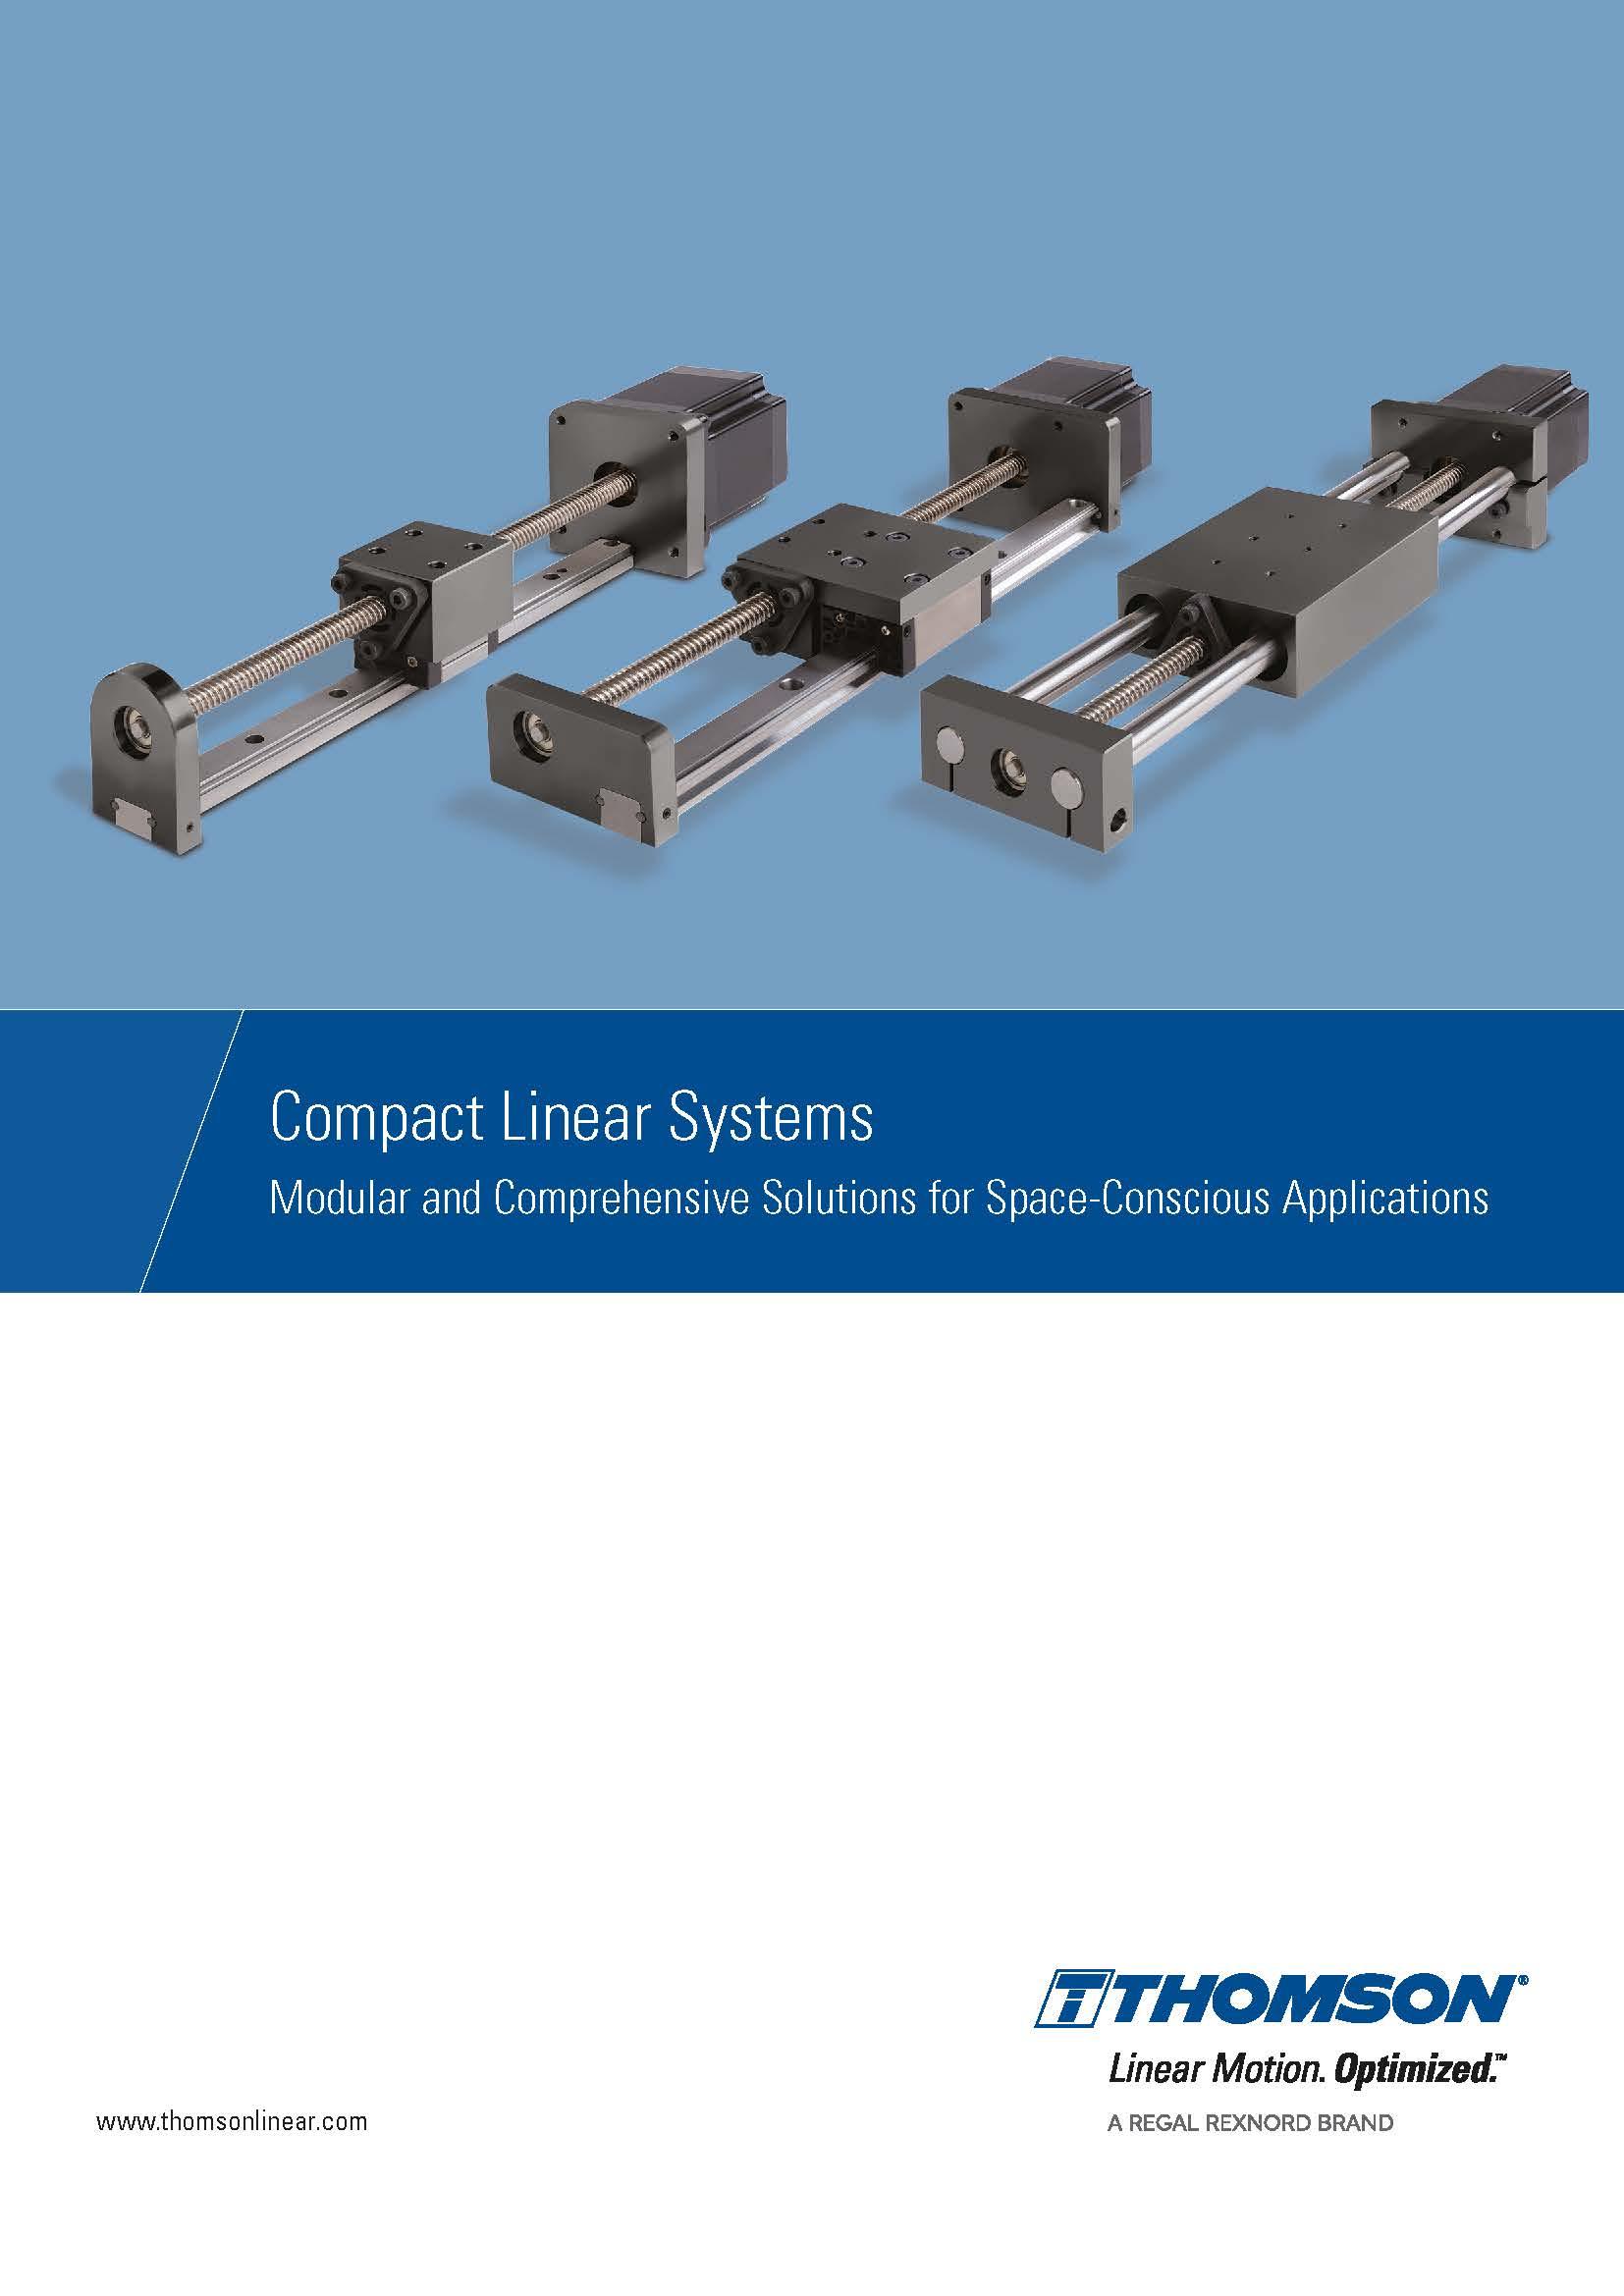 Thomson_Comp_Linear_System_ENG